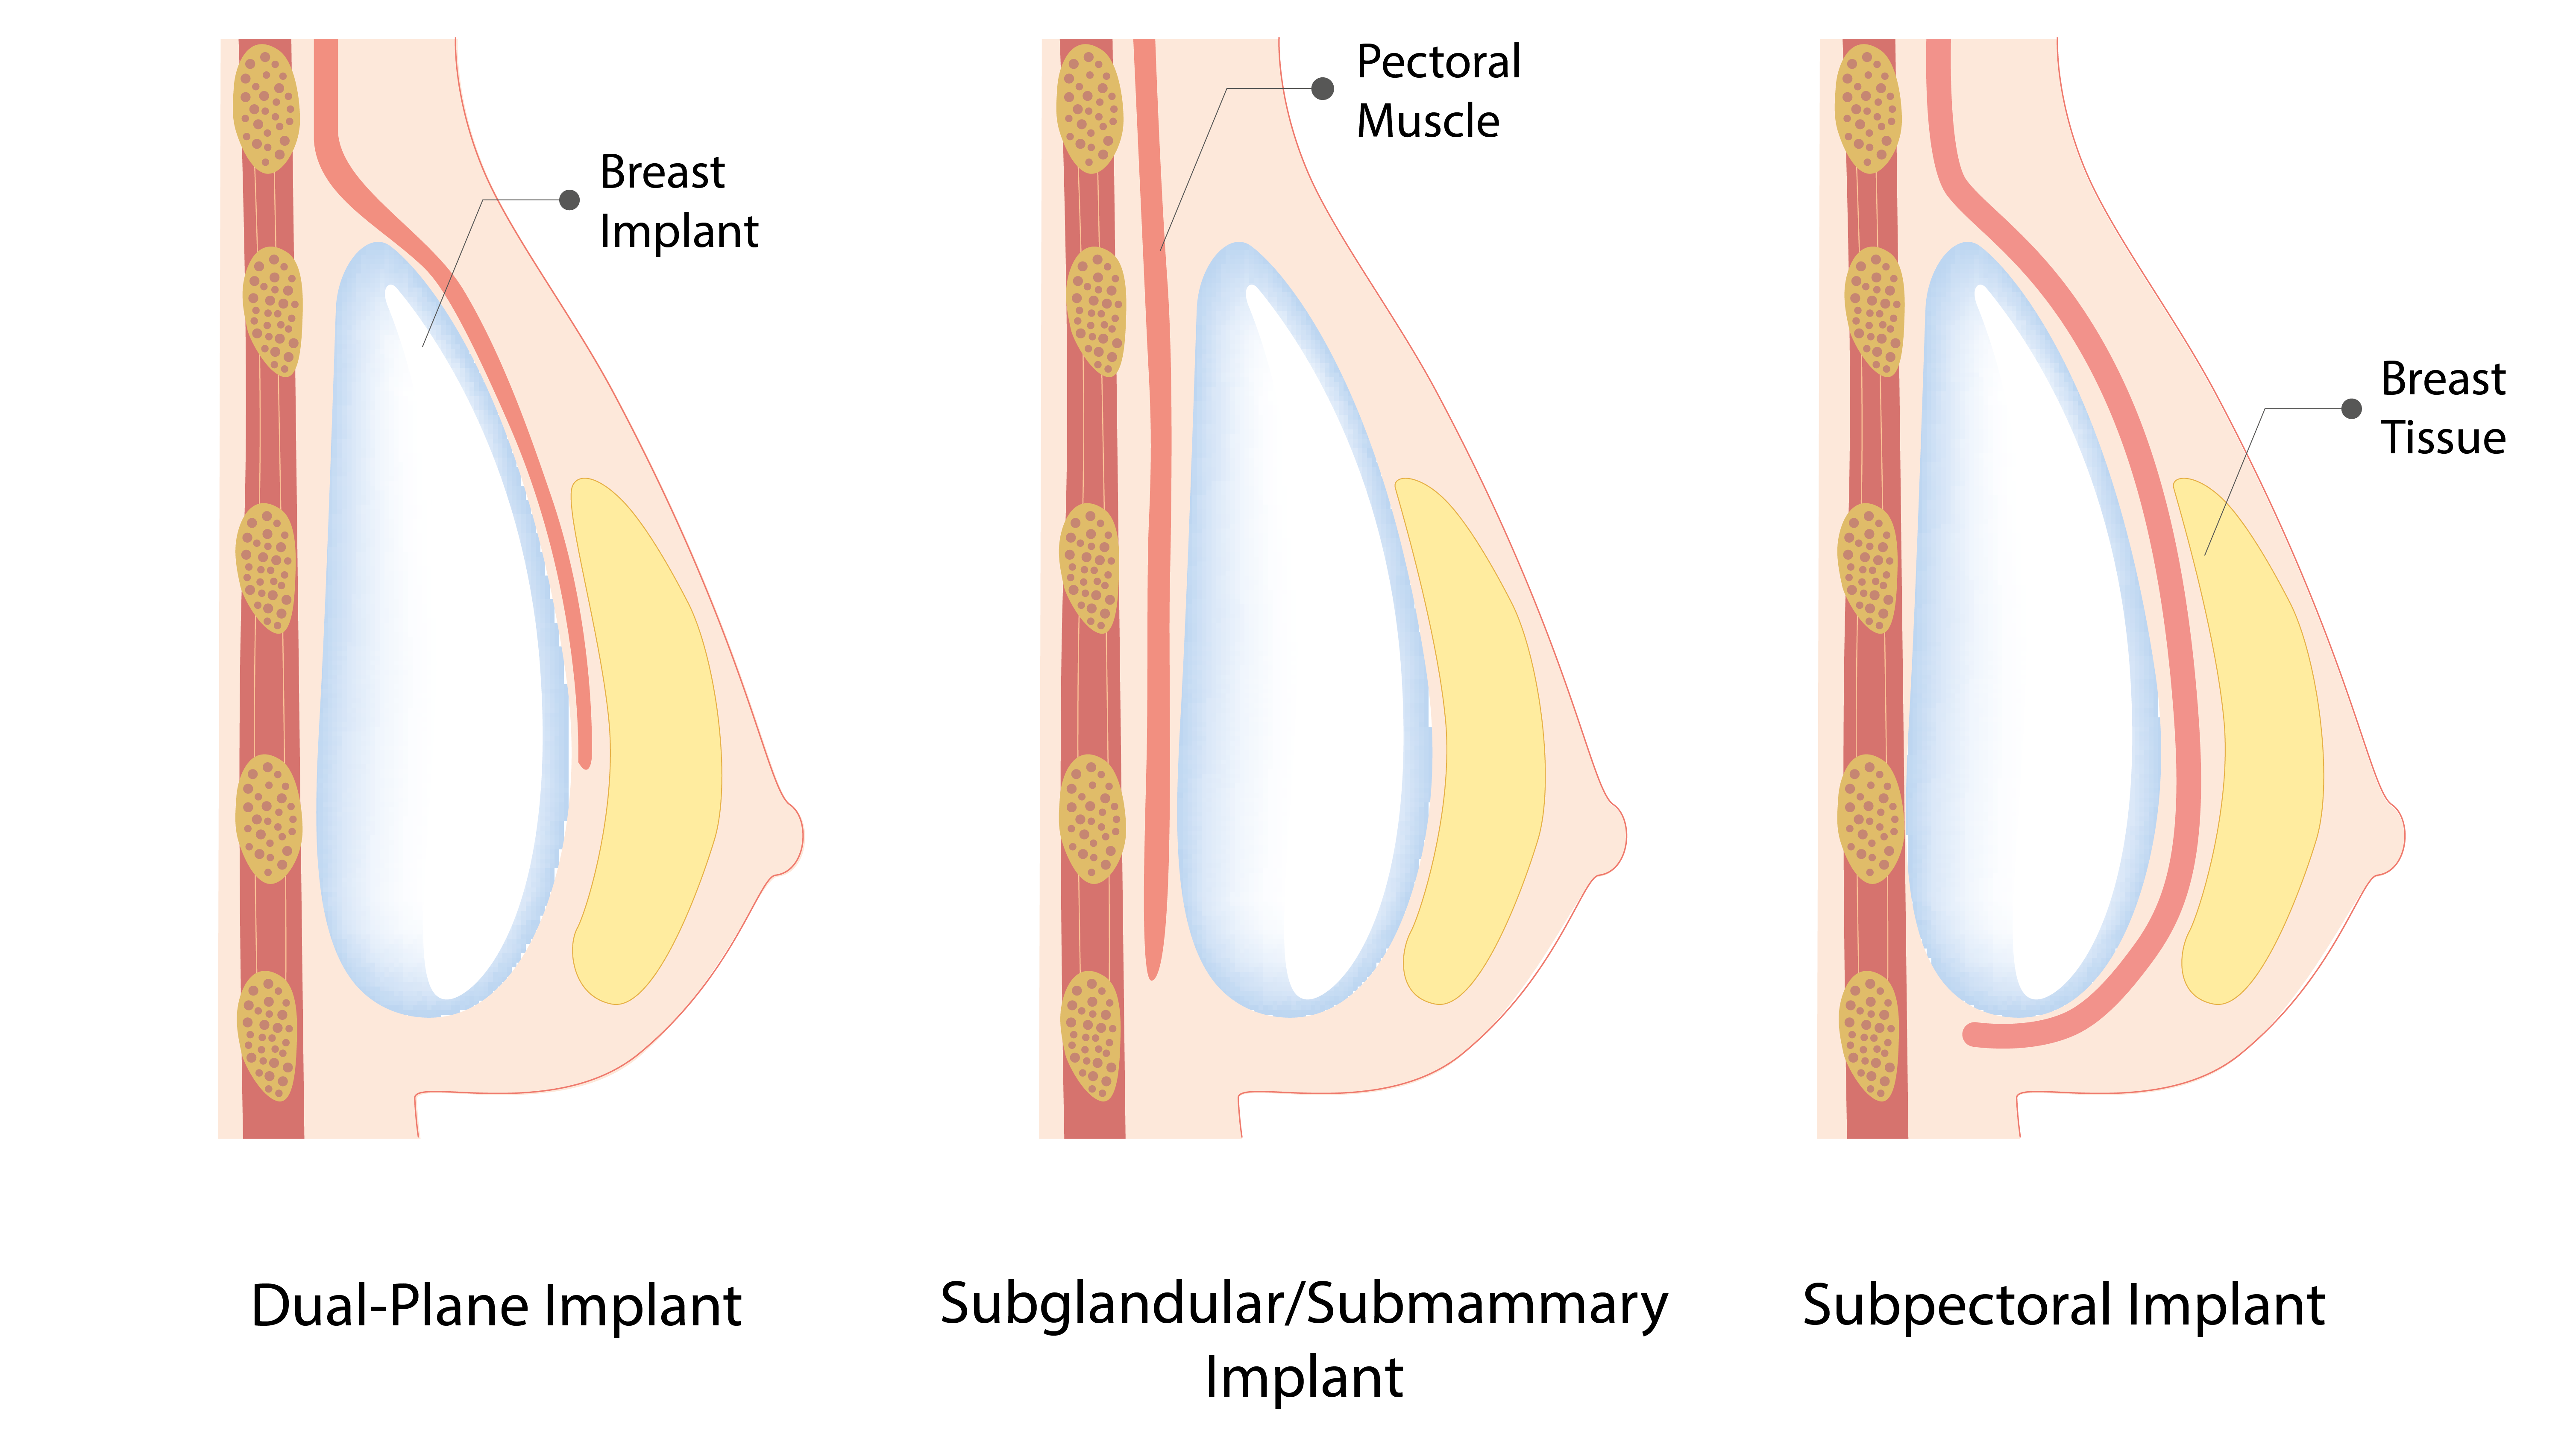 How Much Does Breast Augmentation Cost